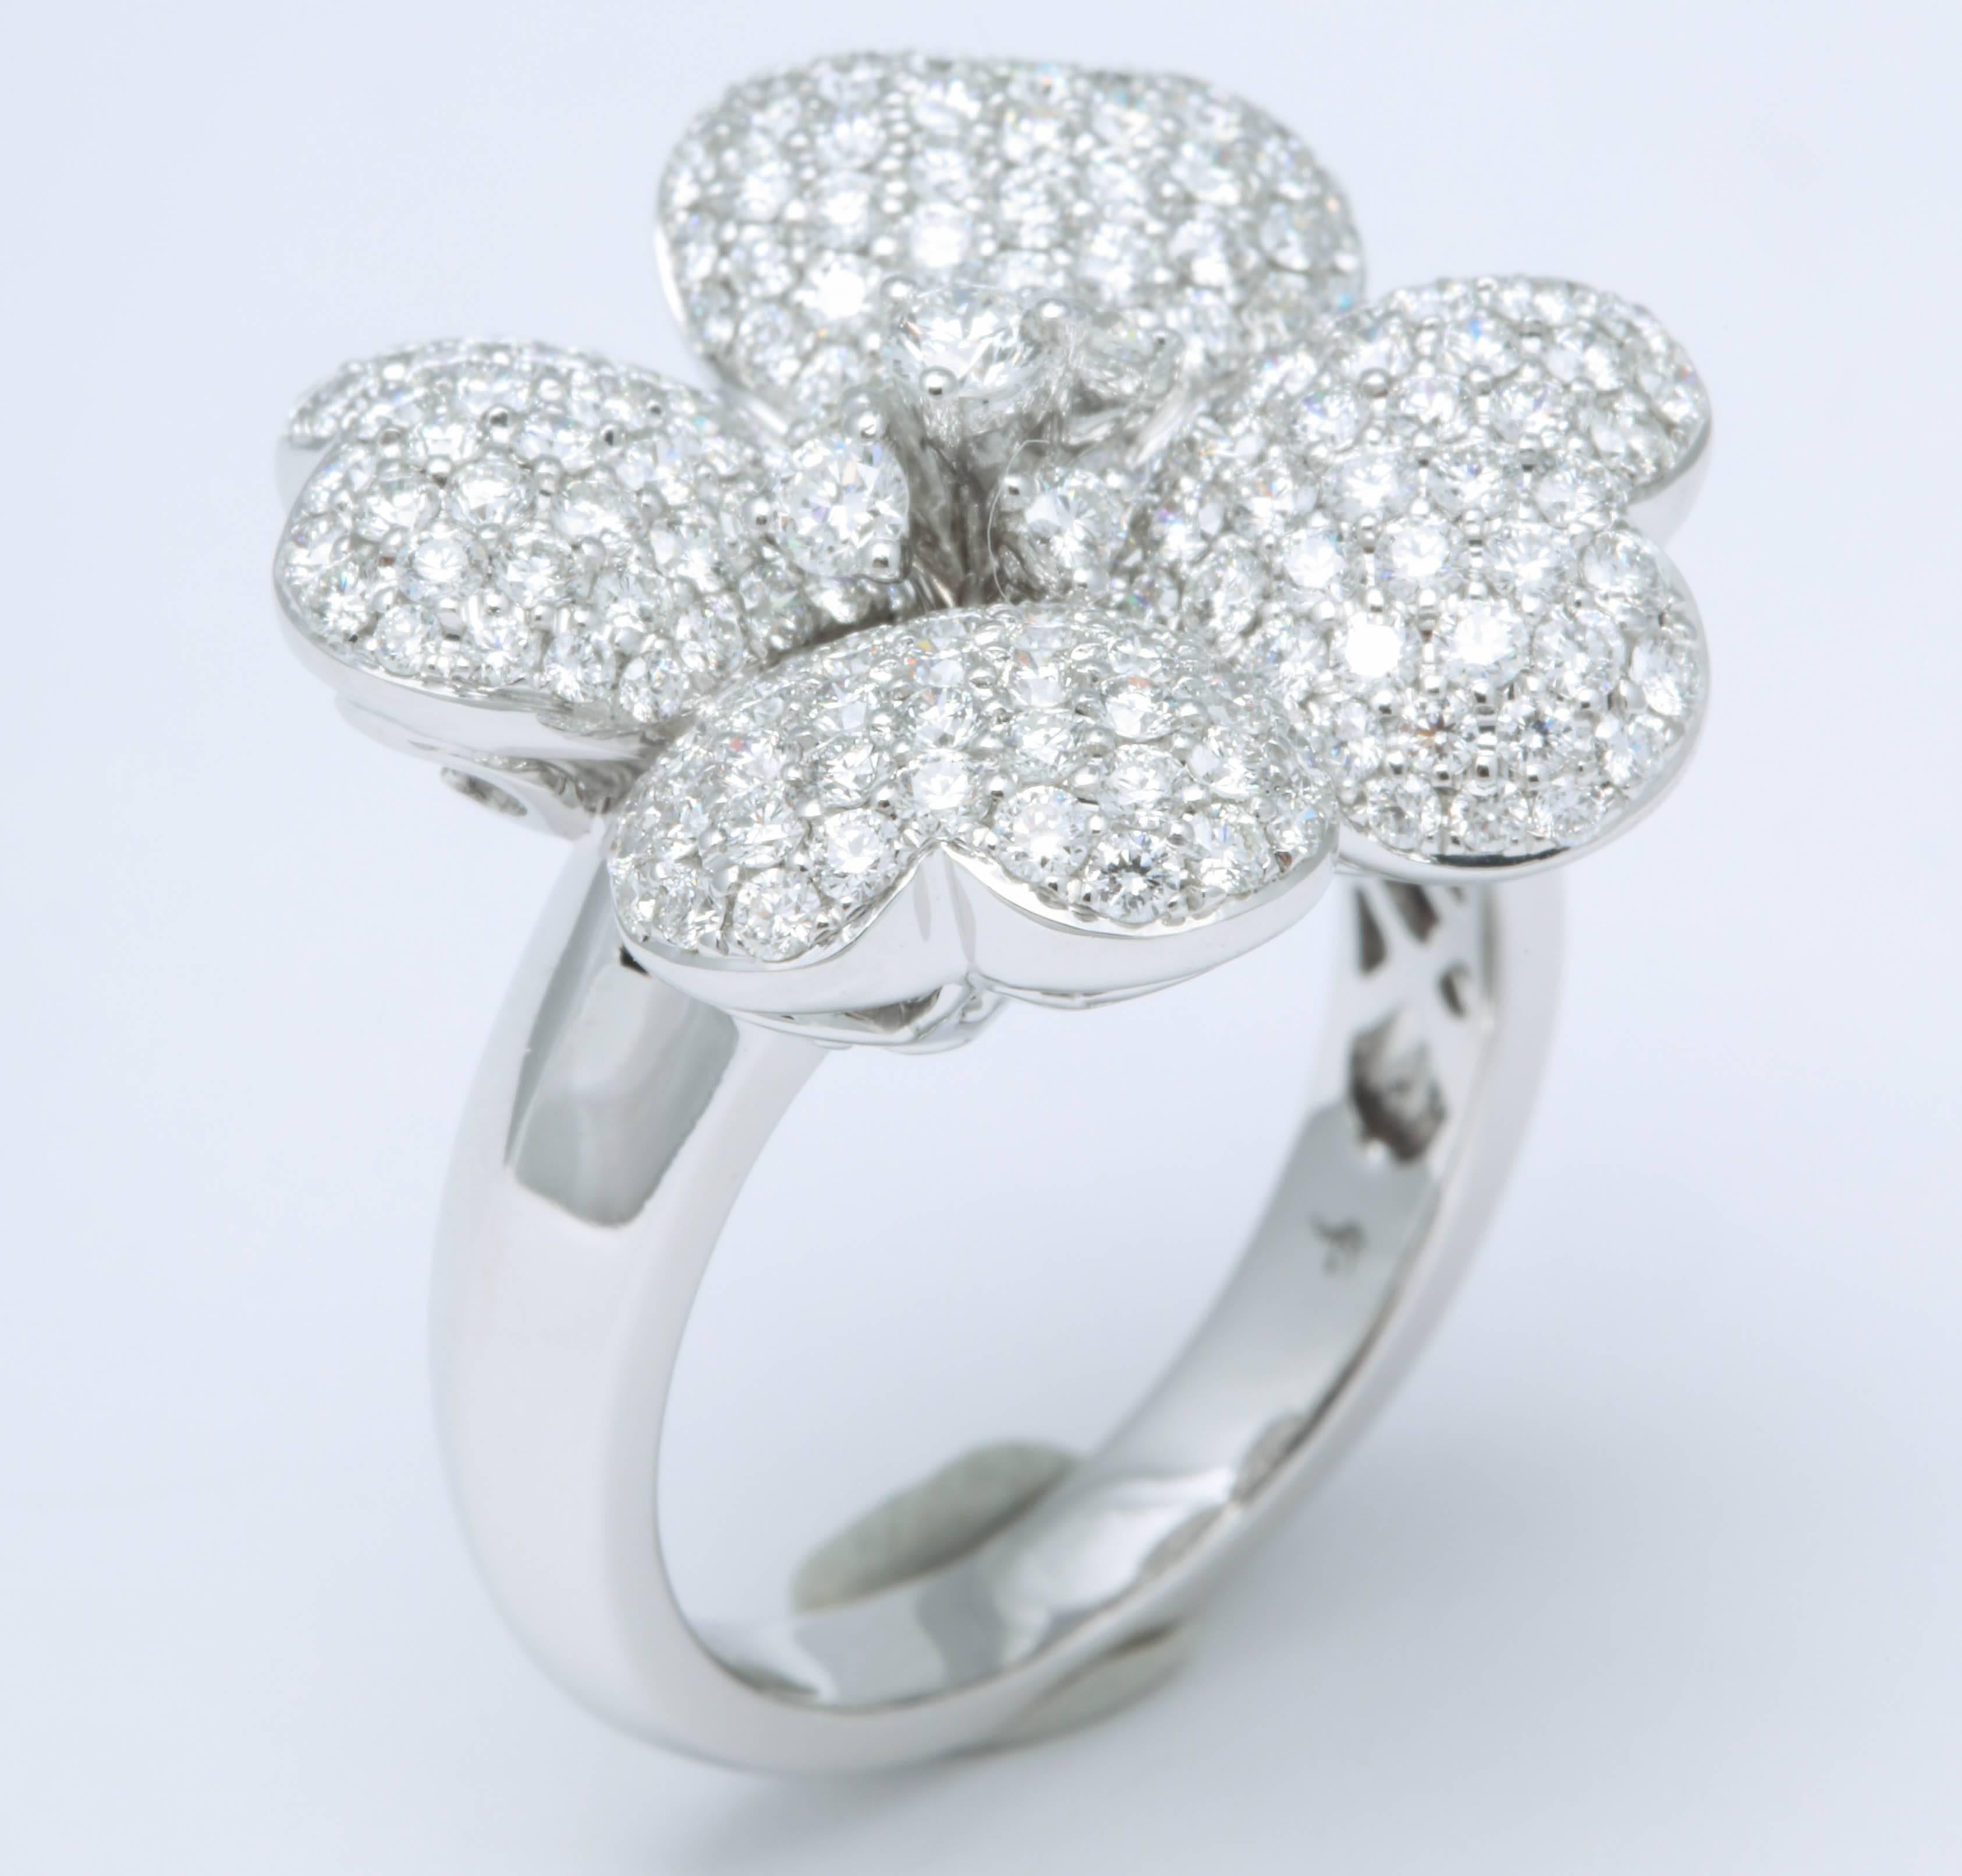 
So much sparkle set into a beautiful and iconic flower design.

2.15 carats of F color VS round brilliant cut diamonds set in 18k white gold. 

Currently a size 6.5 but can be sized to any finger size. 

Approximately .80 inches in diameter. 

The